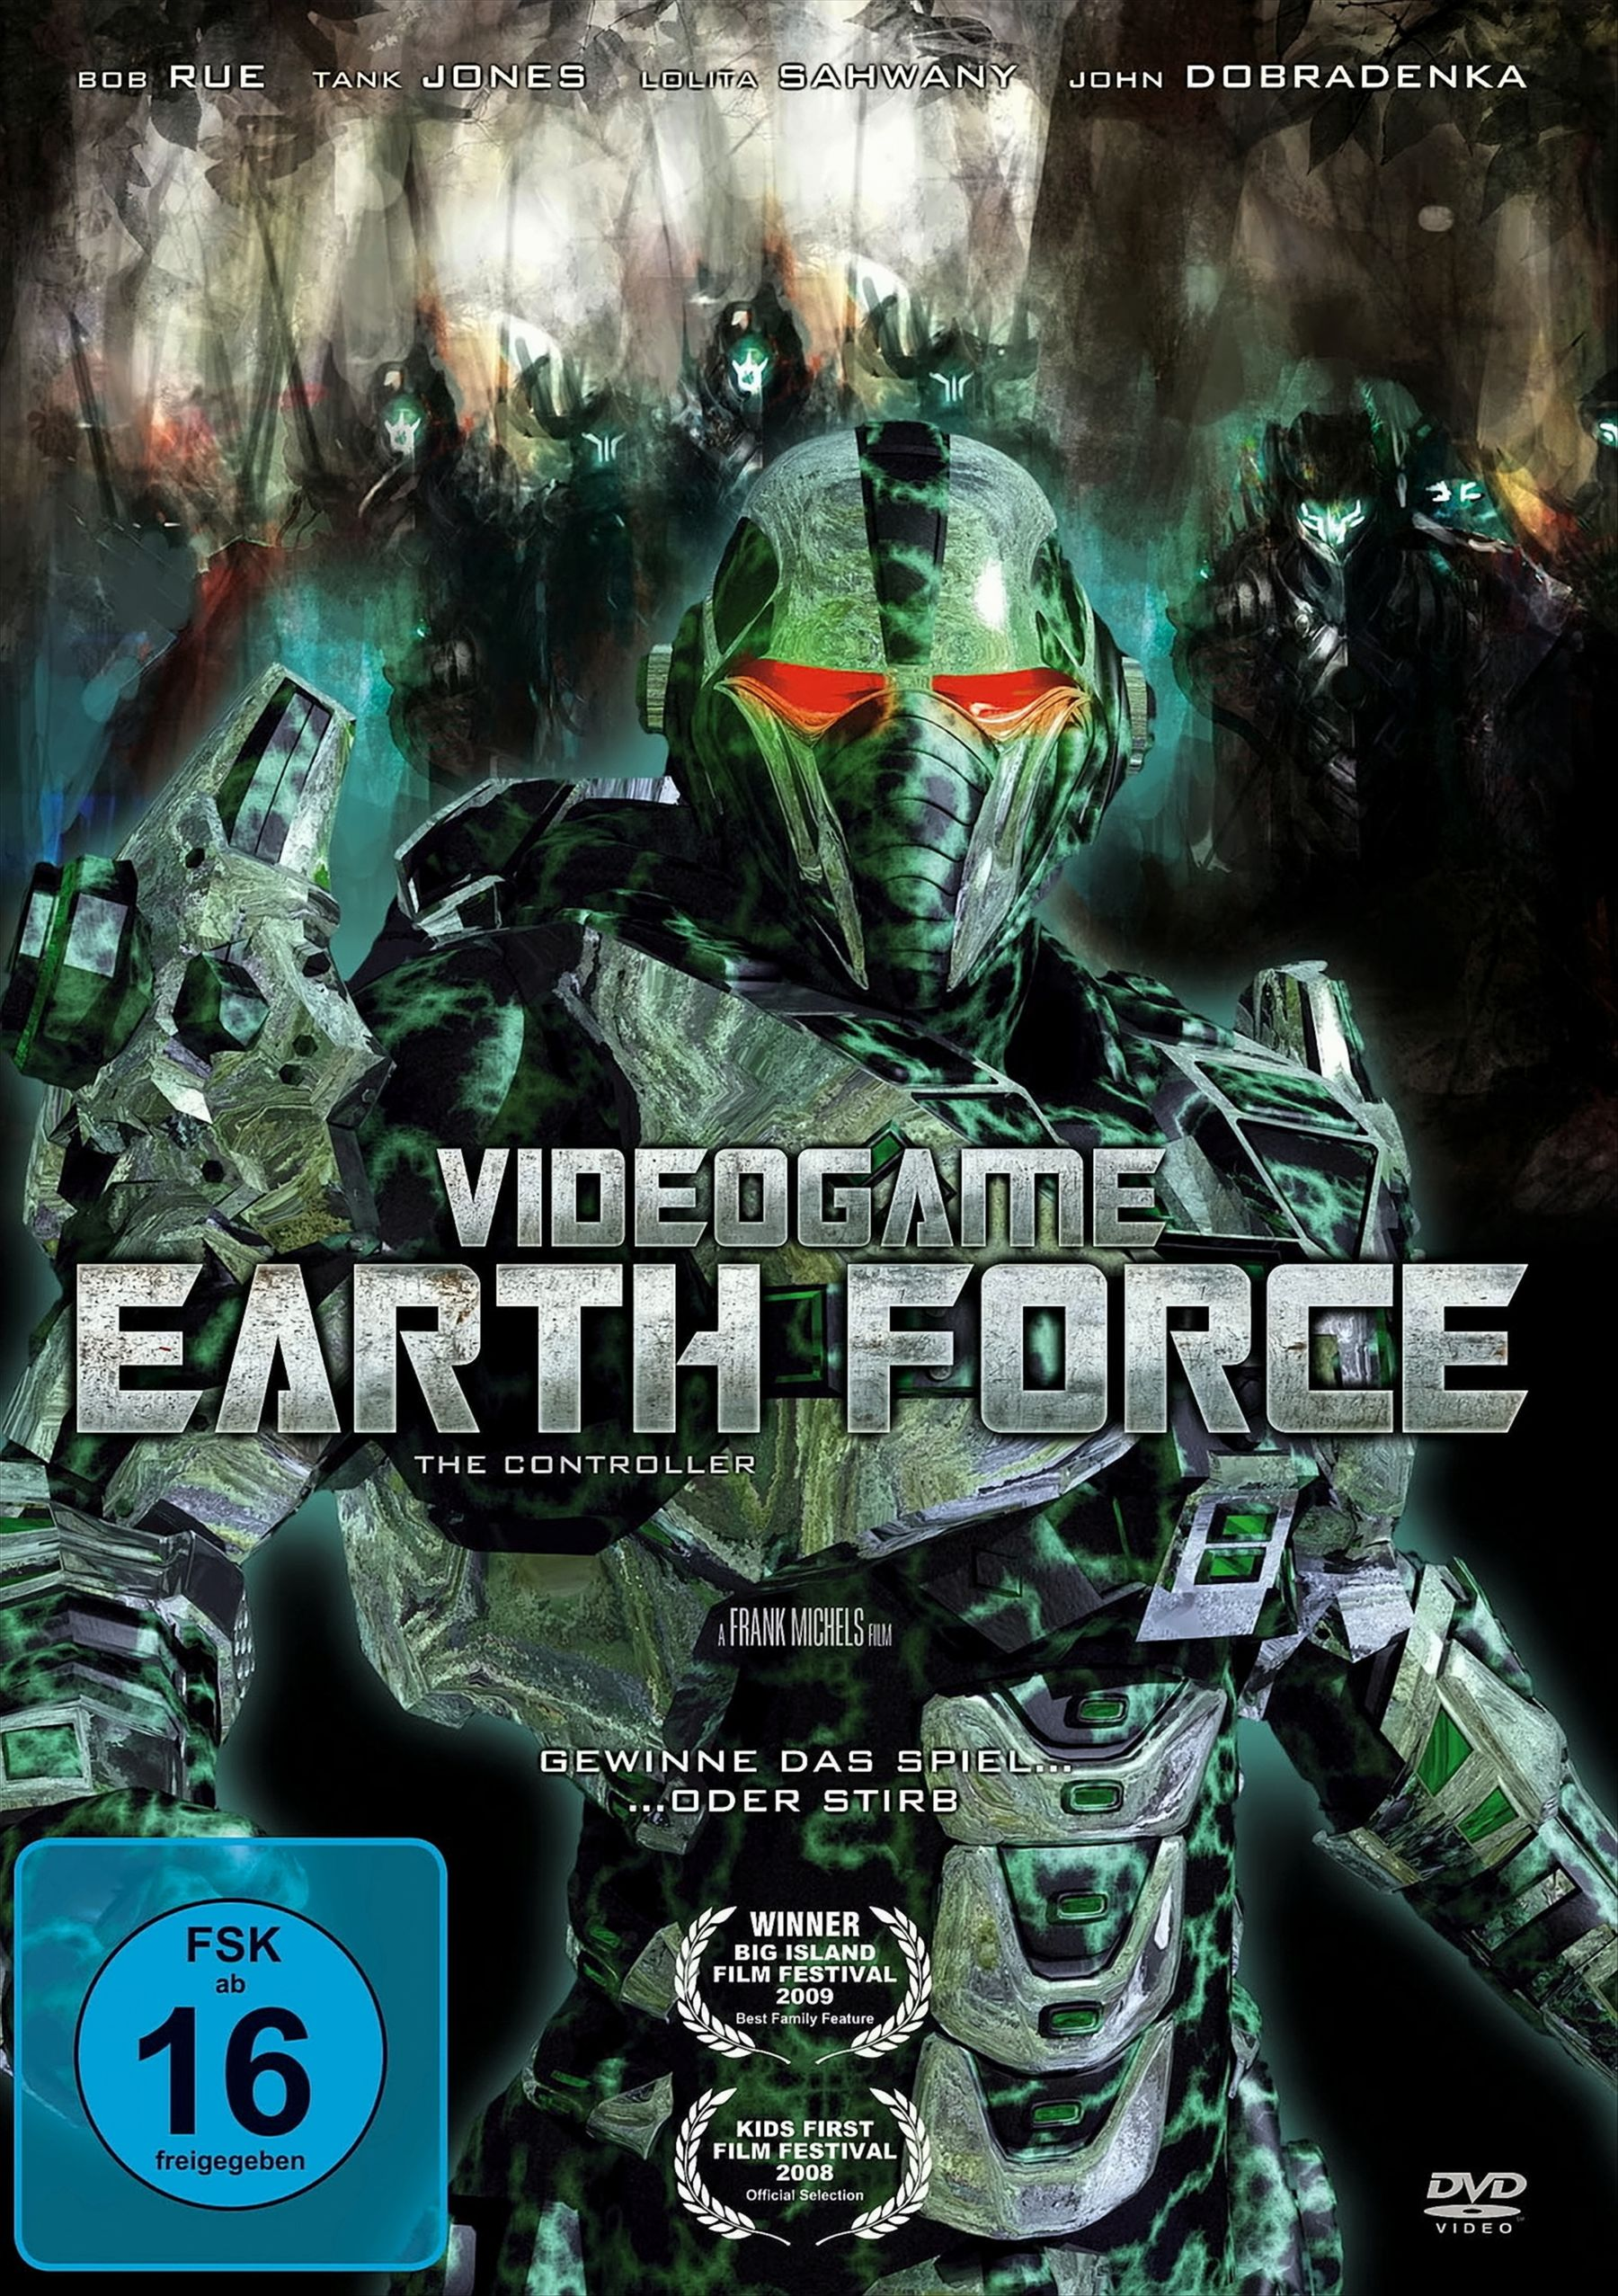 Earth DVD Videogame Force